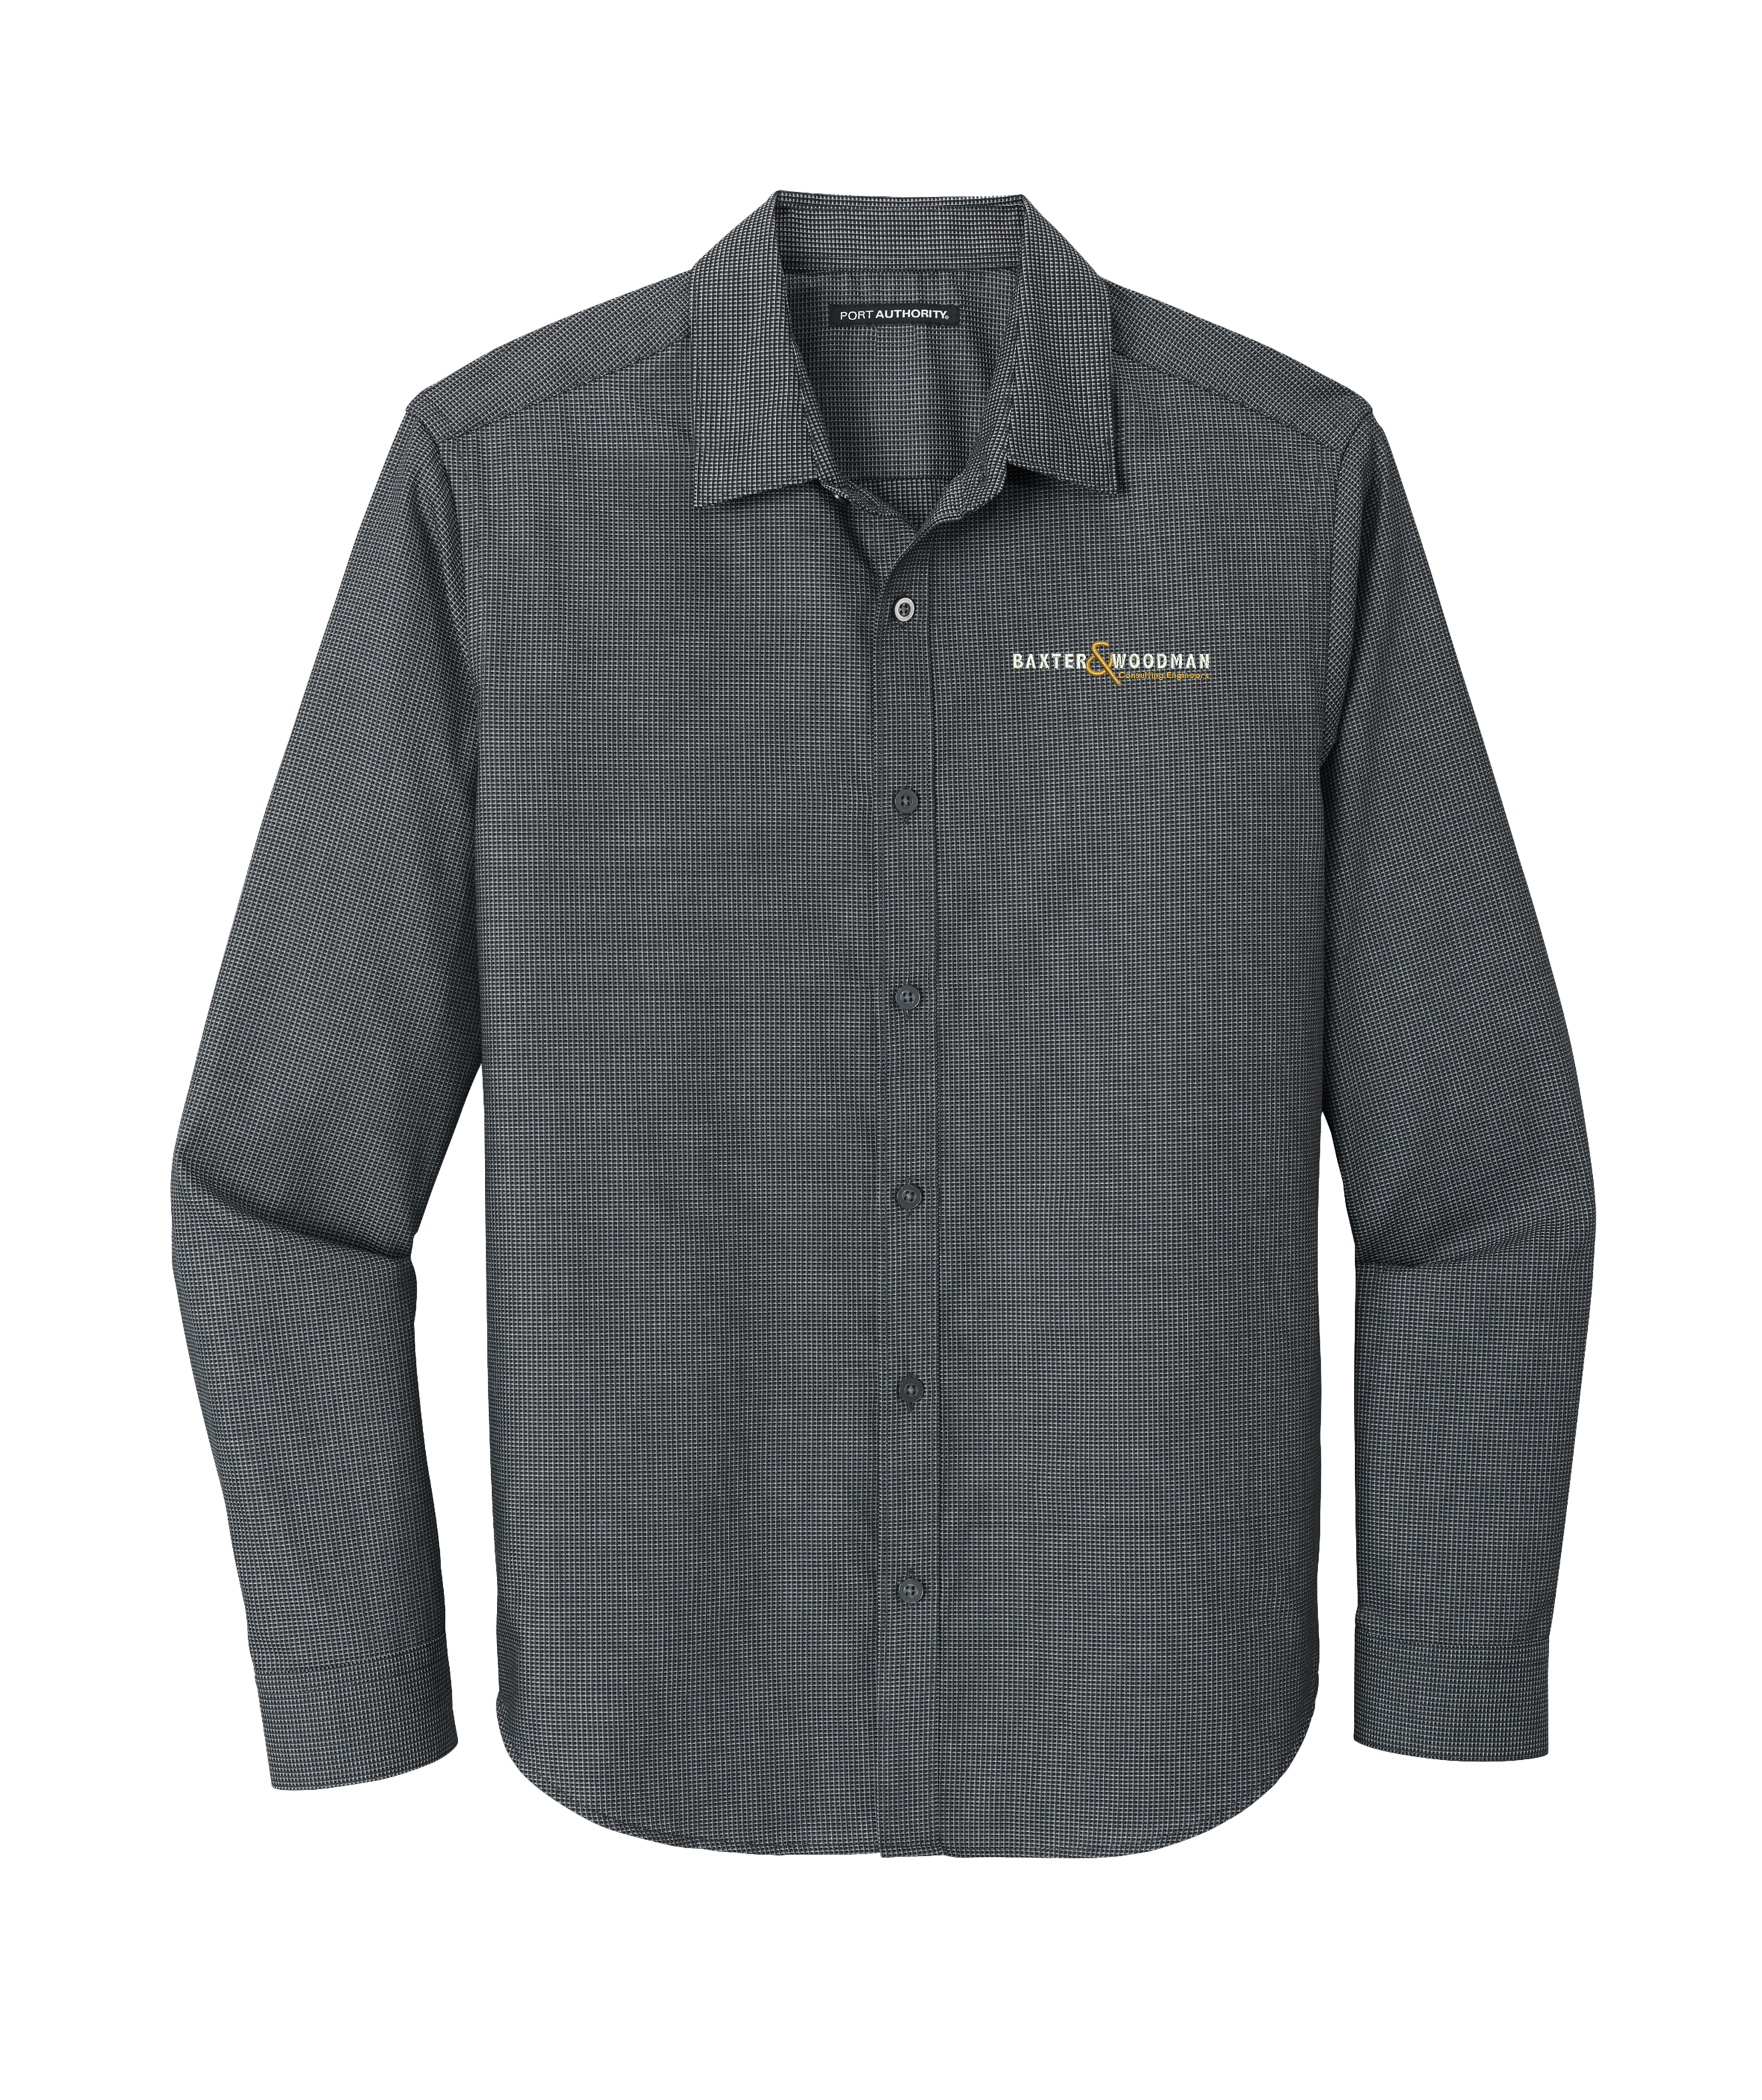 Port Authority ® Pincheck Easy Care Shirt